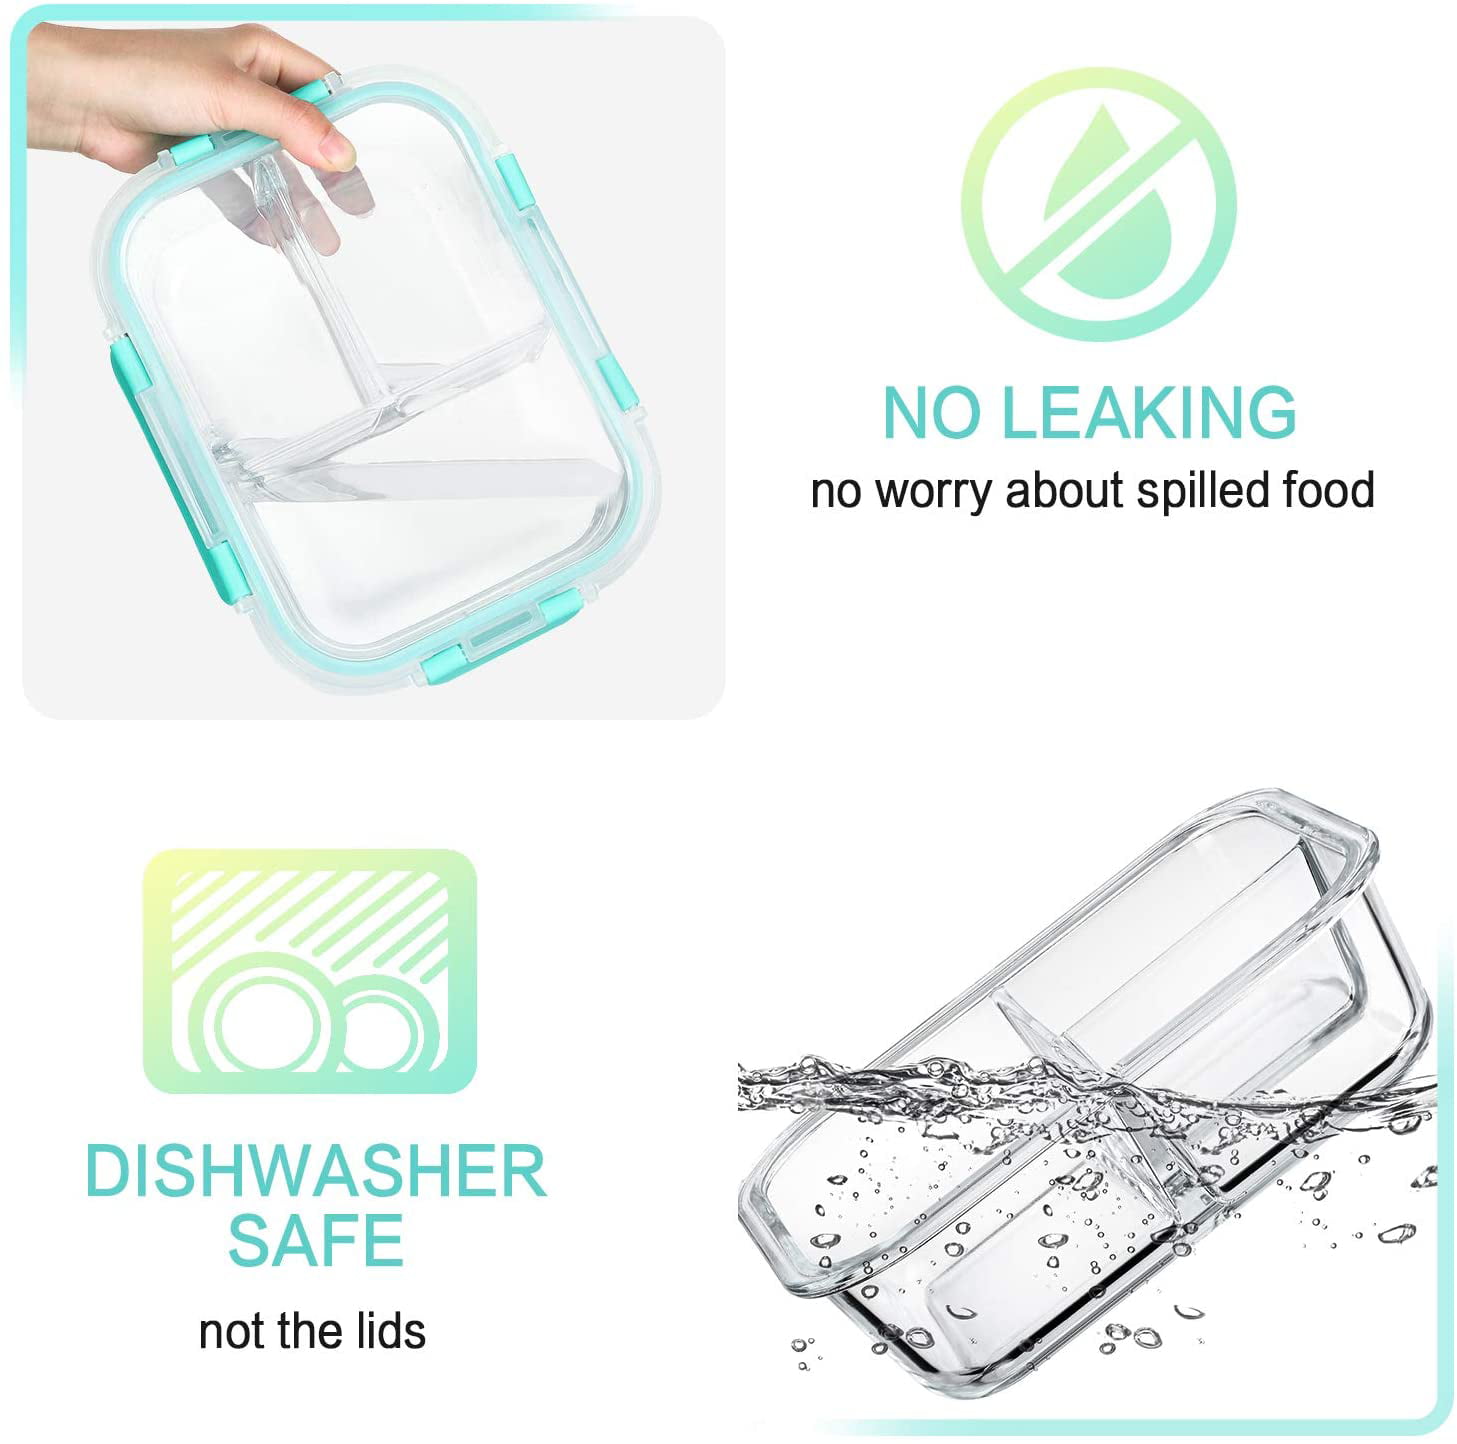 DAS TRUST 3 Pack 36oz Bento Box Glass Meal Prep Container 3 Compartment  Glass Food Storage Container…See more DAS TRUST 3 Pack 36oz Bento Box Glass